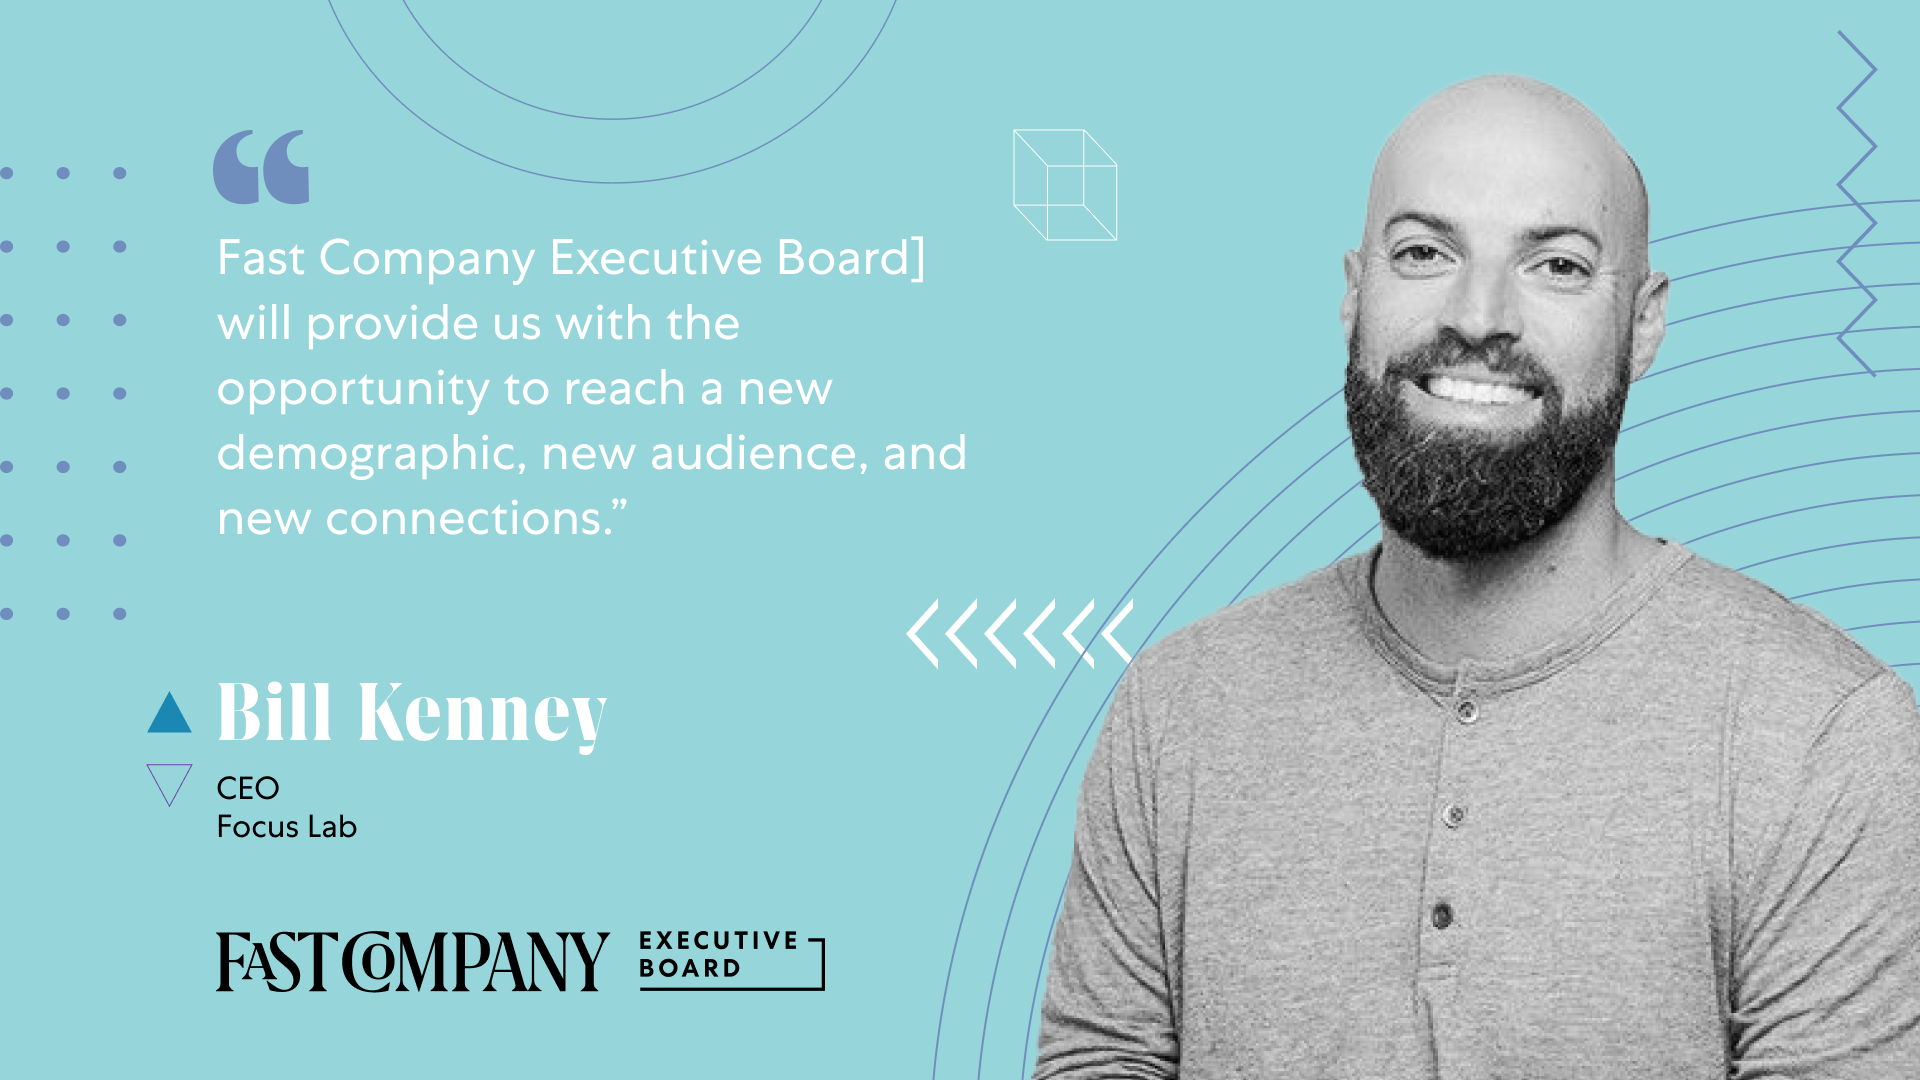 For Bill Kenney, Fast Company Executive Board Provides Access to a New Demographic